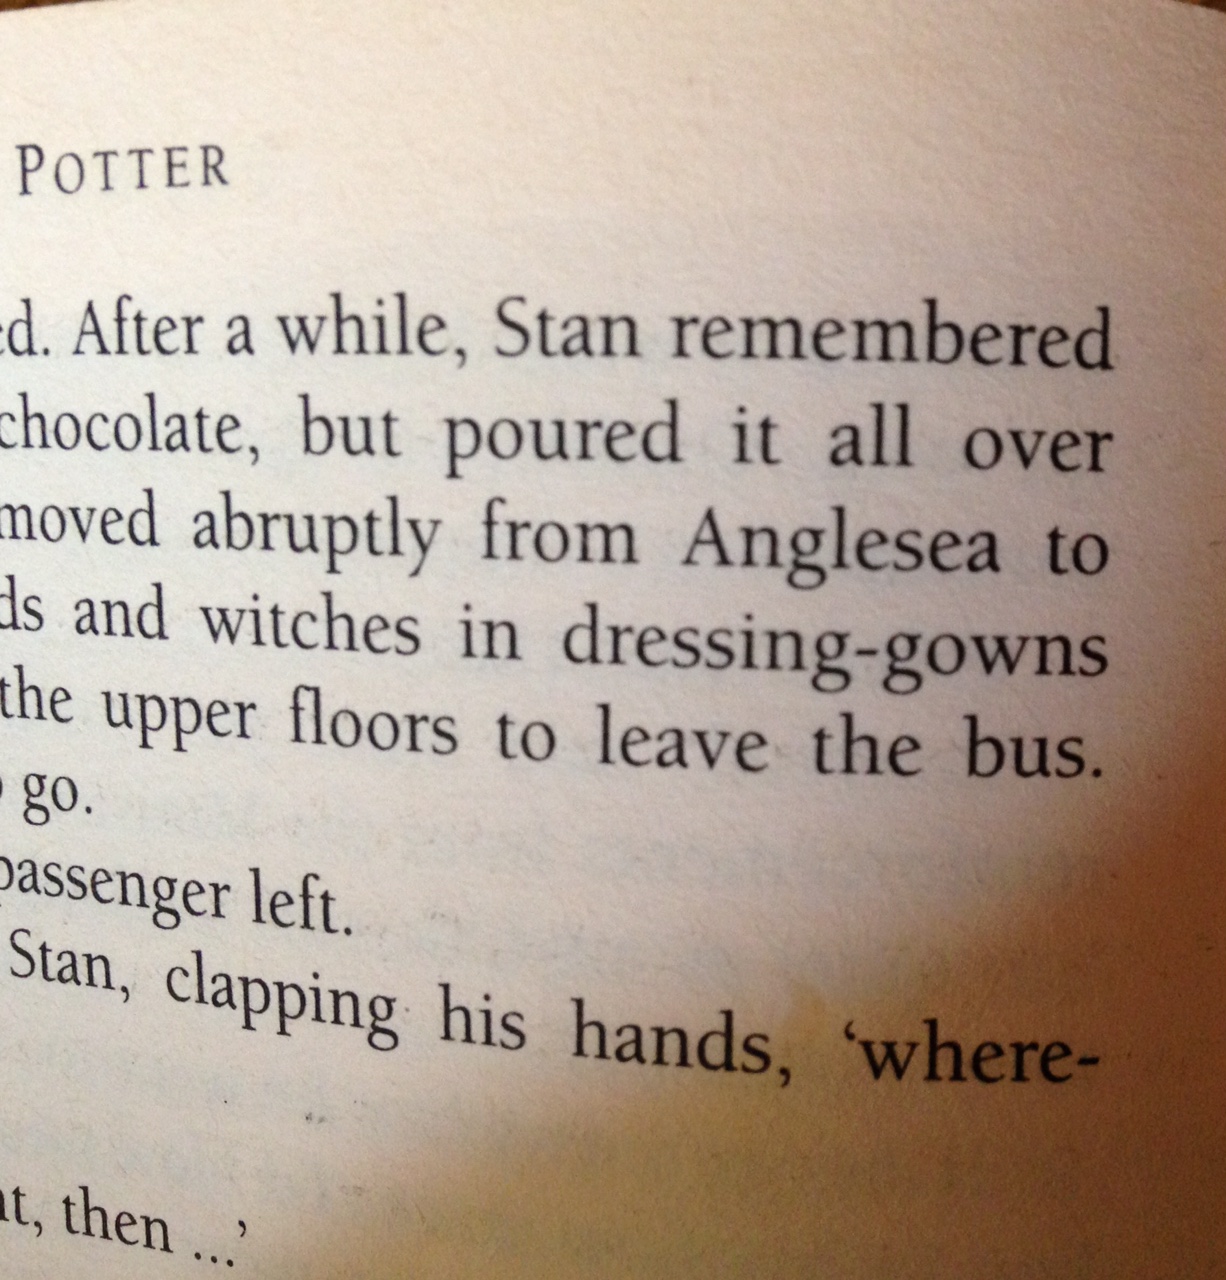 First edition paperback of Harry Potter and the Prisoner of Azkaban - Image 3 of 4